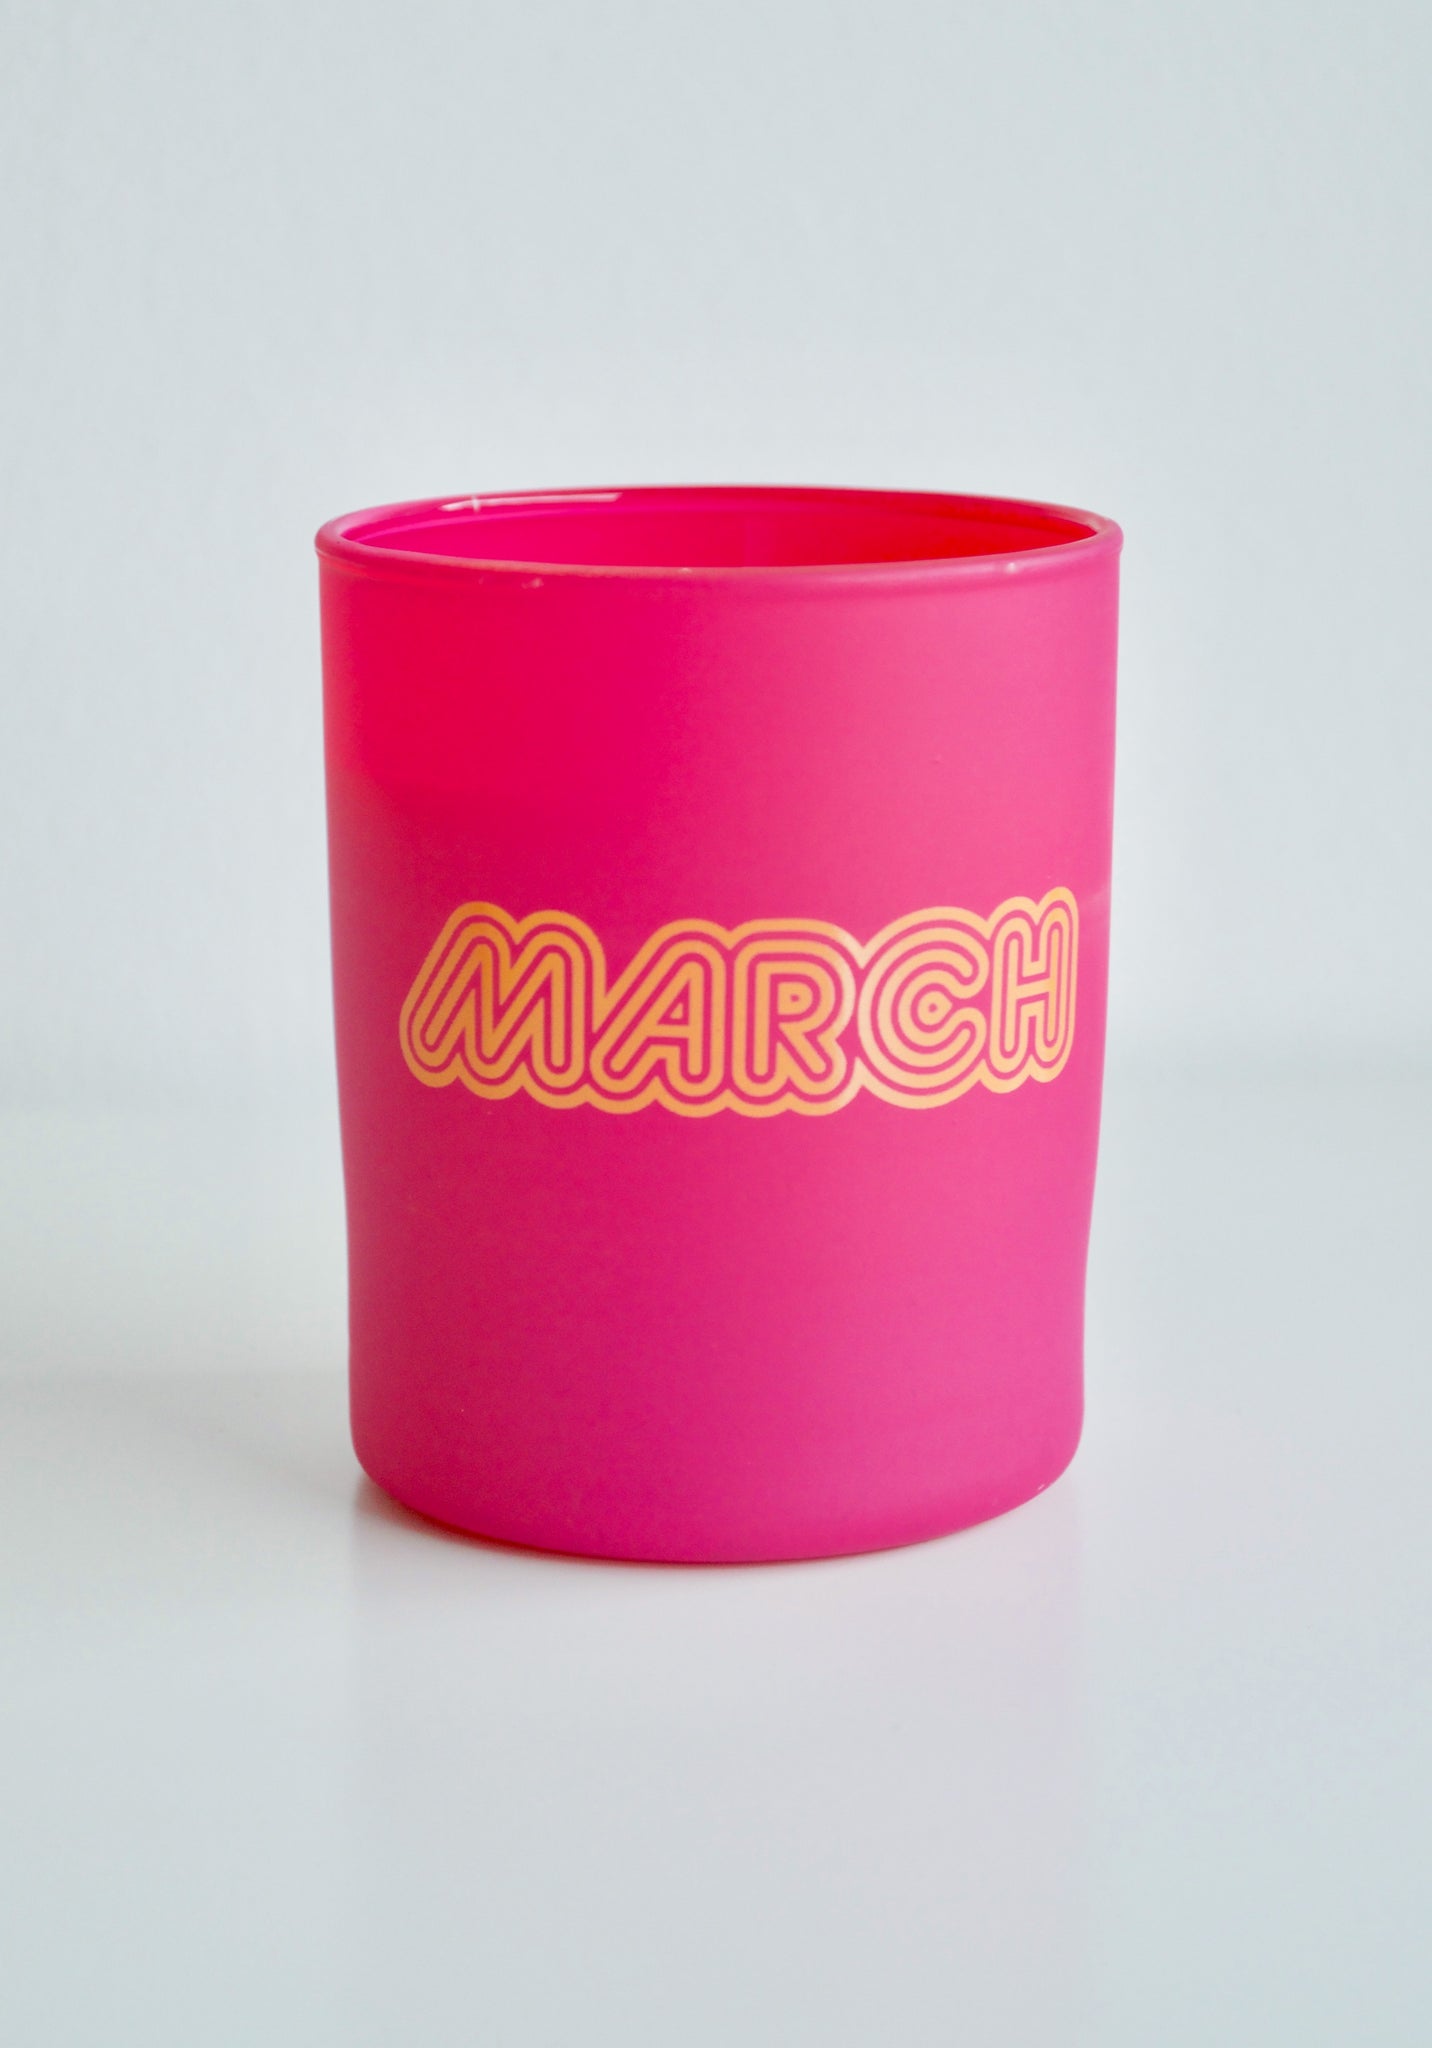 MARCH Candle - Limited Edition